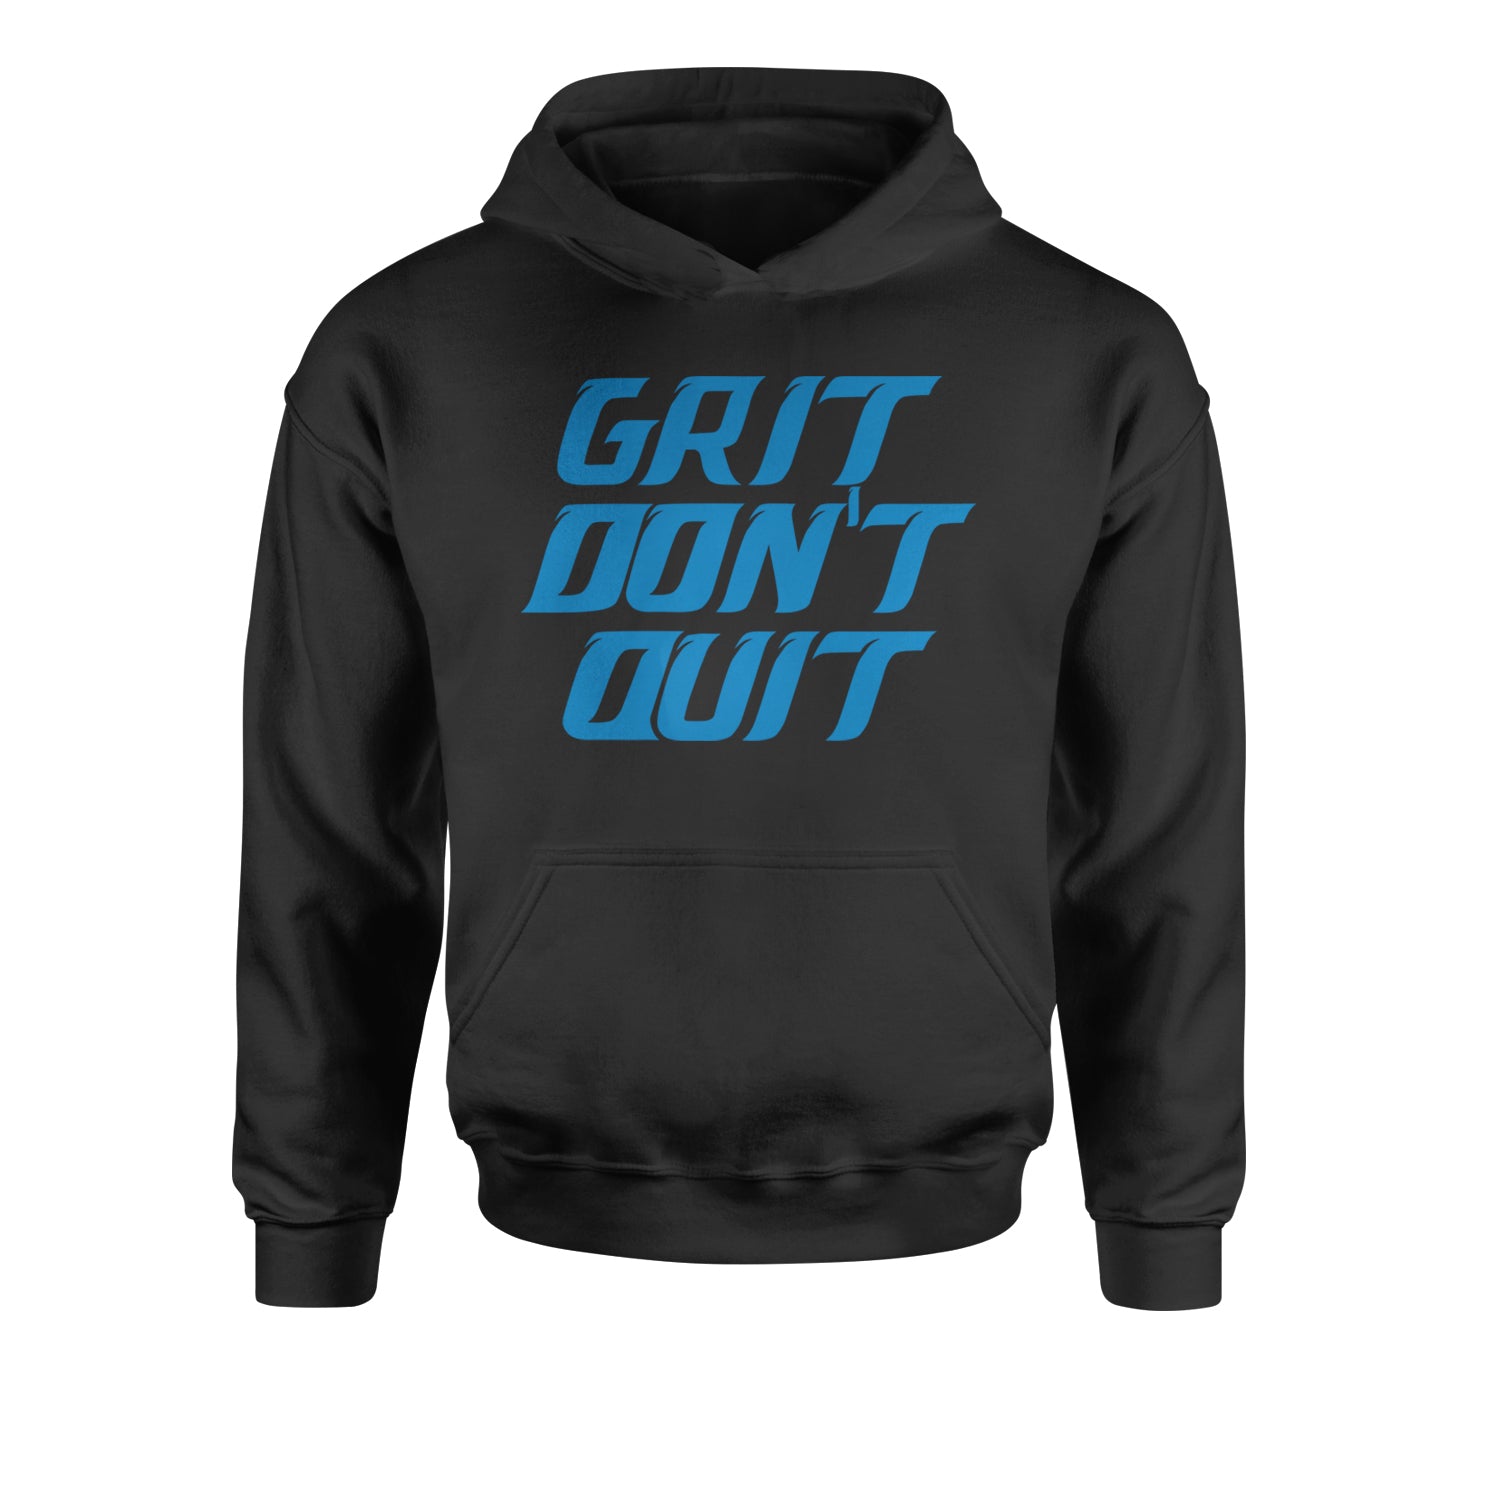 Detroit Grit Don't Quit Youth-Sized Hoodie